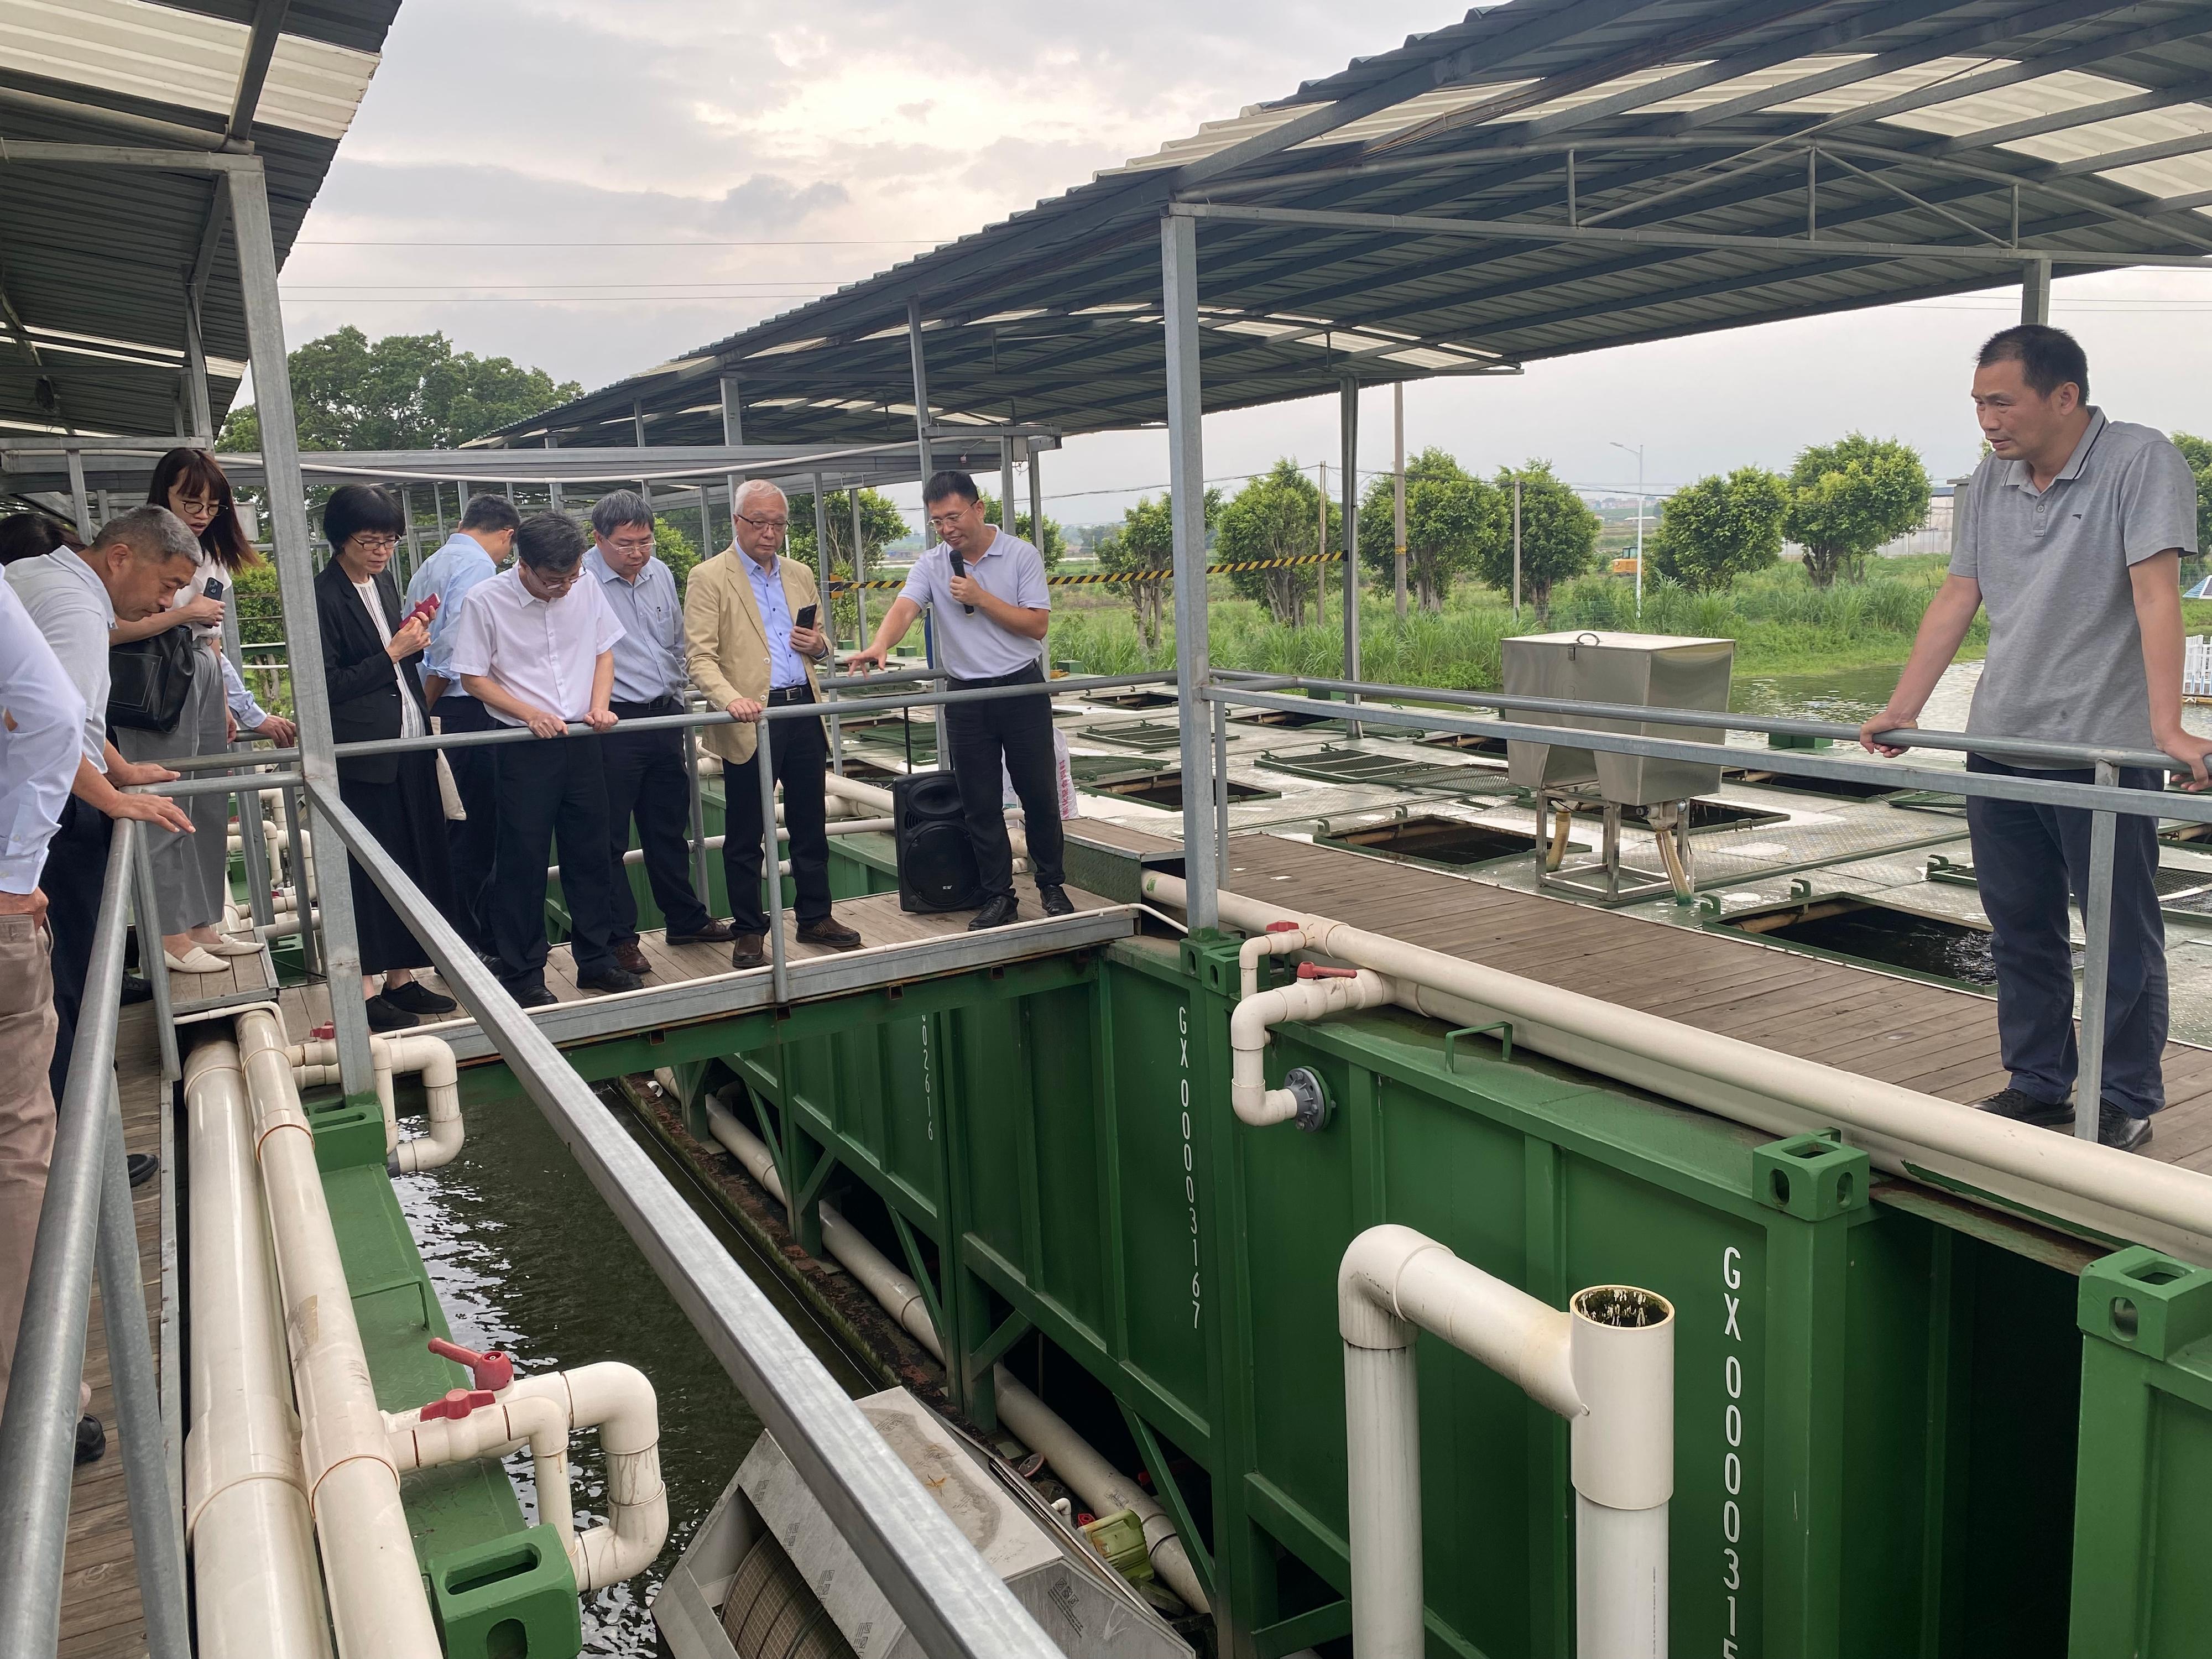 The Secretary for Environment and Ecology, Mr Tse Chin-wan, began his visit in Guangzhou and Zhaoqing today (July 18) and visited the aquaculture farm of Guanxing (Zhaoqing) Agricultural Technology Co. Ltd in the afternoon. Photo shows Mr Tse (third right); the Permanent Secretary for Environment and Ecology (Food), Miss Vivian Lau (third left); and the Director of Agriculture, Fisheries and Conservation, Dr Leung Siu-fai (fourth right), receiving a briefing from a representative of the farm on the latest developments in aquaponic container farming.